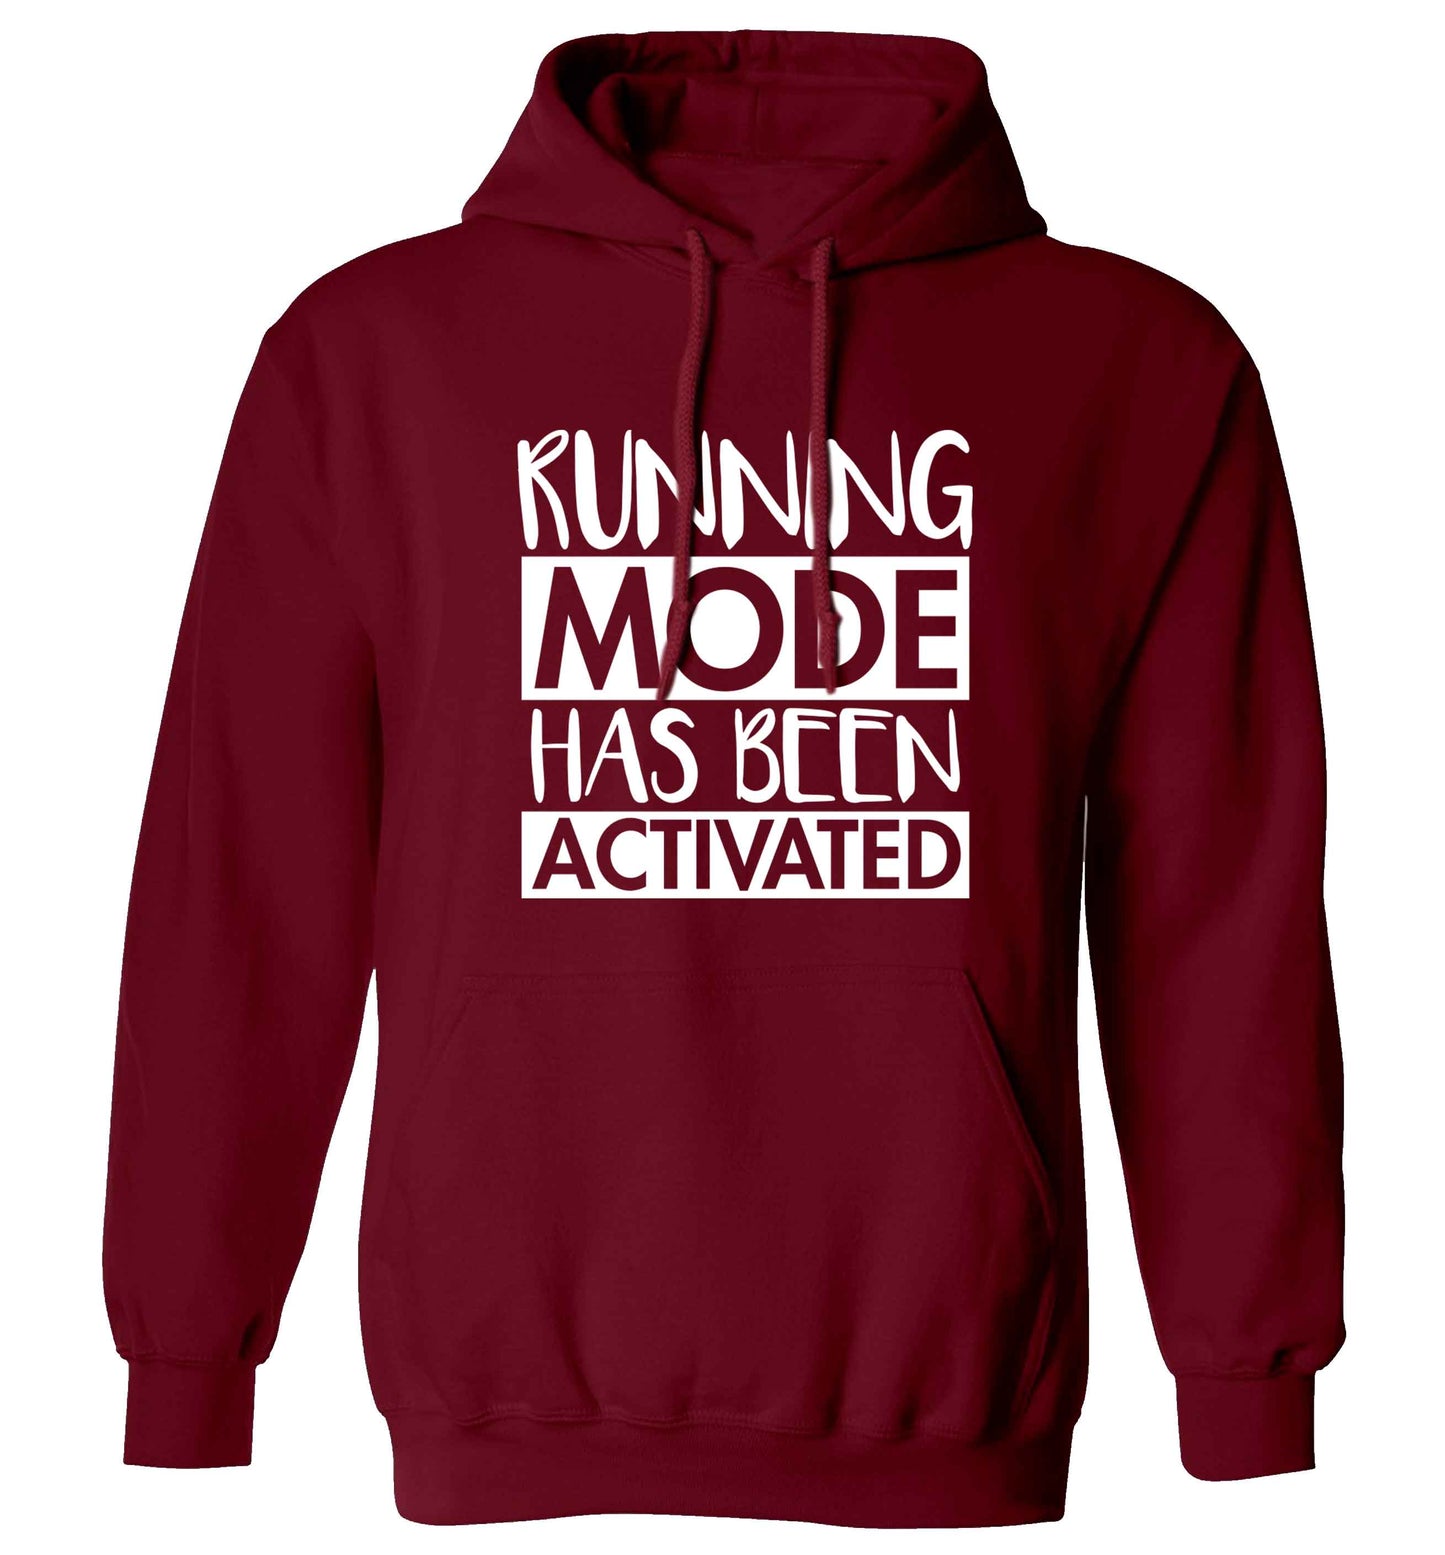 Running mode has been activated adults unisex maroon hoodie 2XL